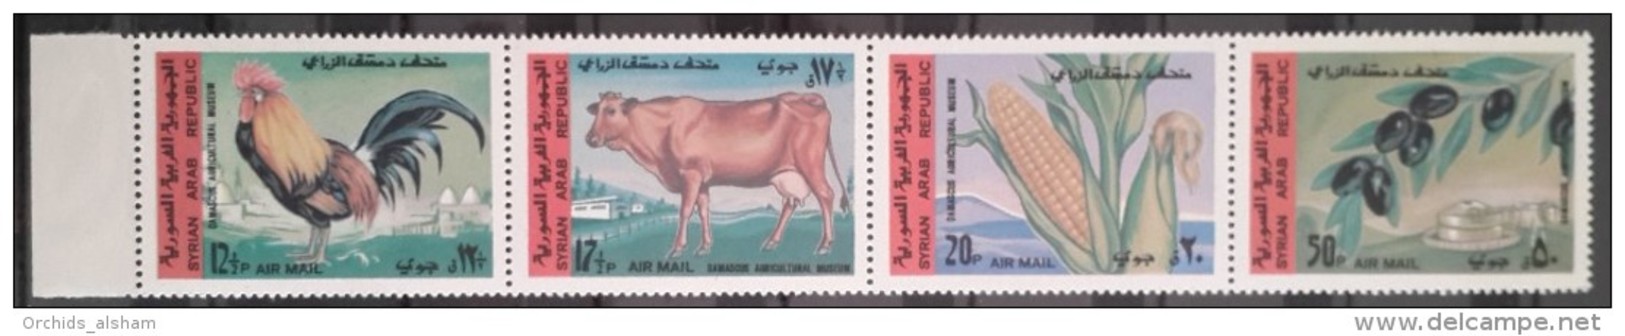 Syria 1969 Mi 1087-1090 MNH Complete Issue - One Pane Of 4v. - Agriculture Museum In Damascus - Syria